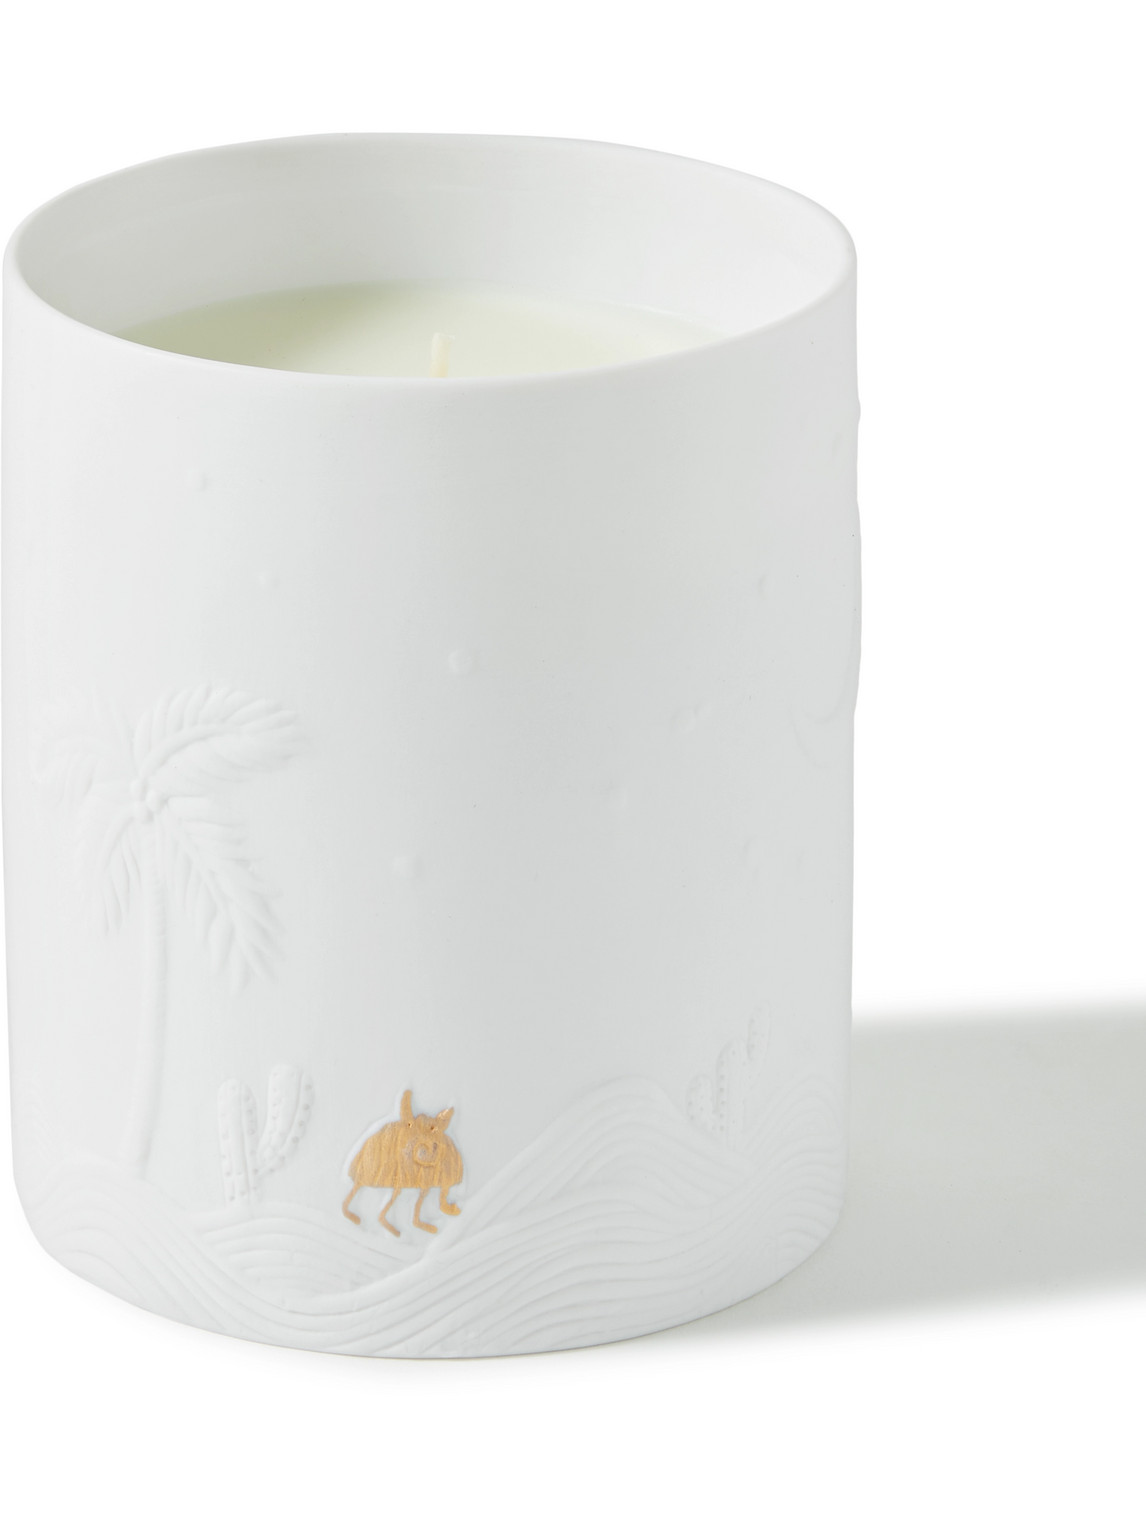 L'Objet - Haas Mojave Palm Scented Candle, 350g - Men - White von L'Objet